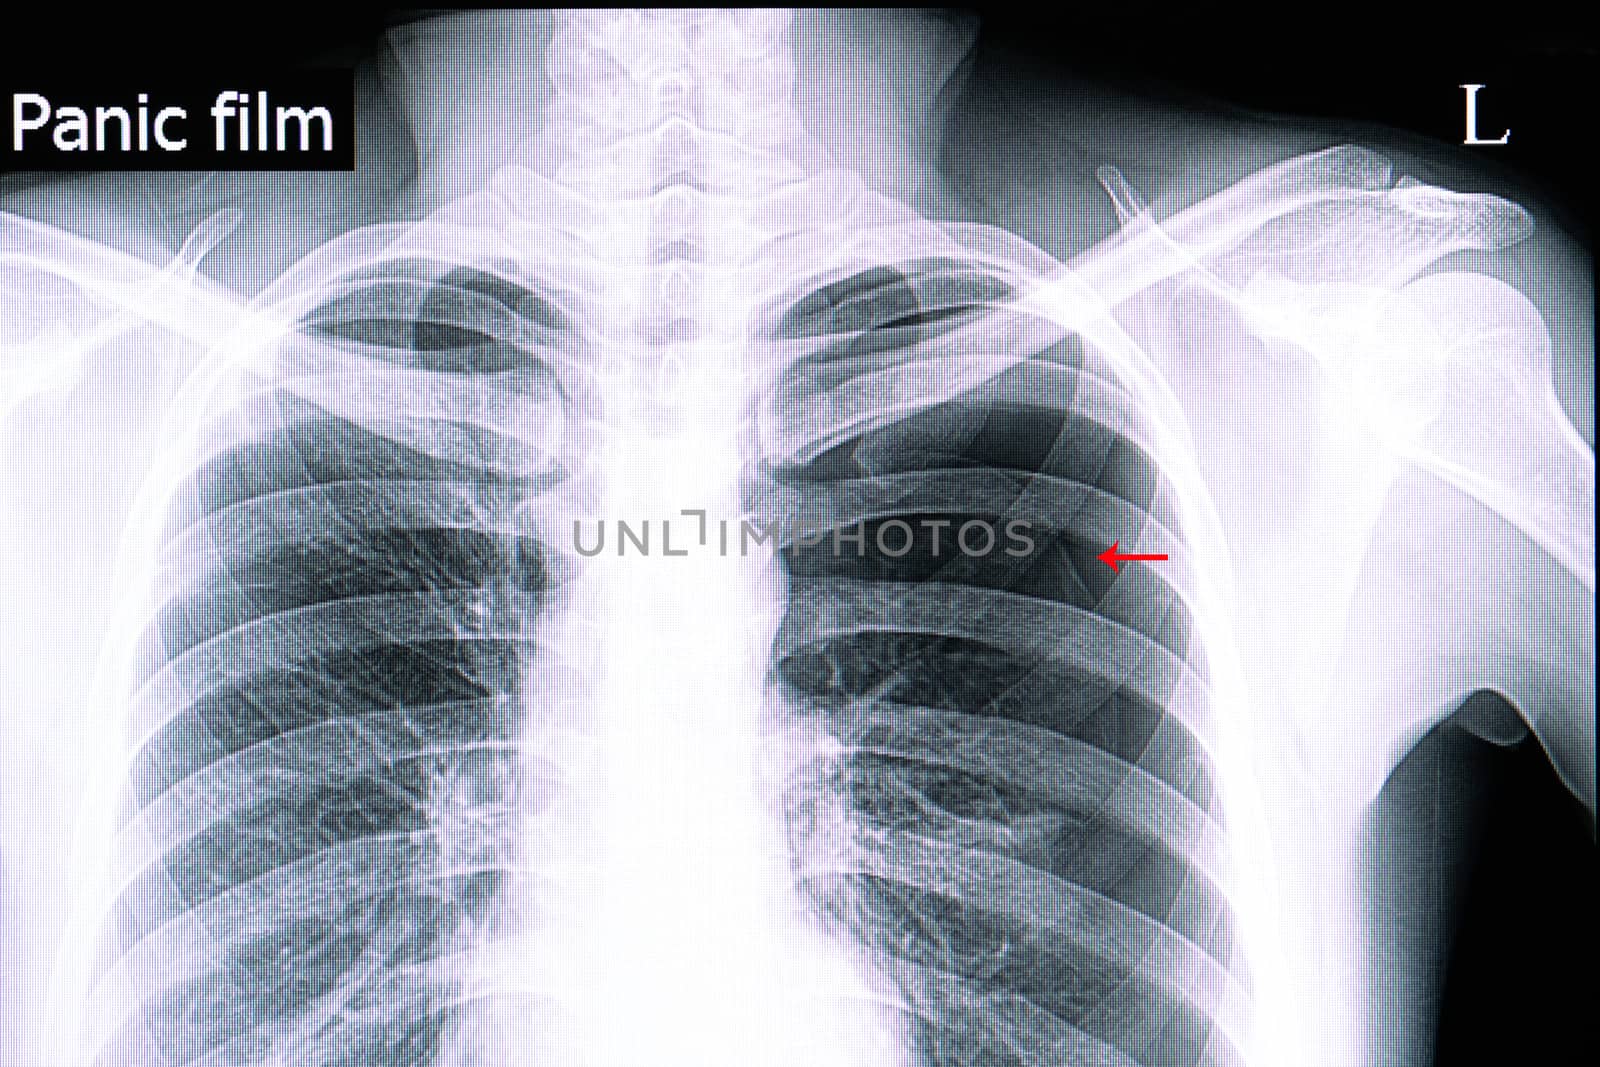 Xray film of a patient with large left lung spontaneous pneumothorax with separation of visceral pleura from the parietal pleura seen as a thin line.